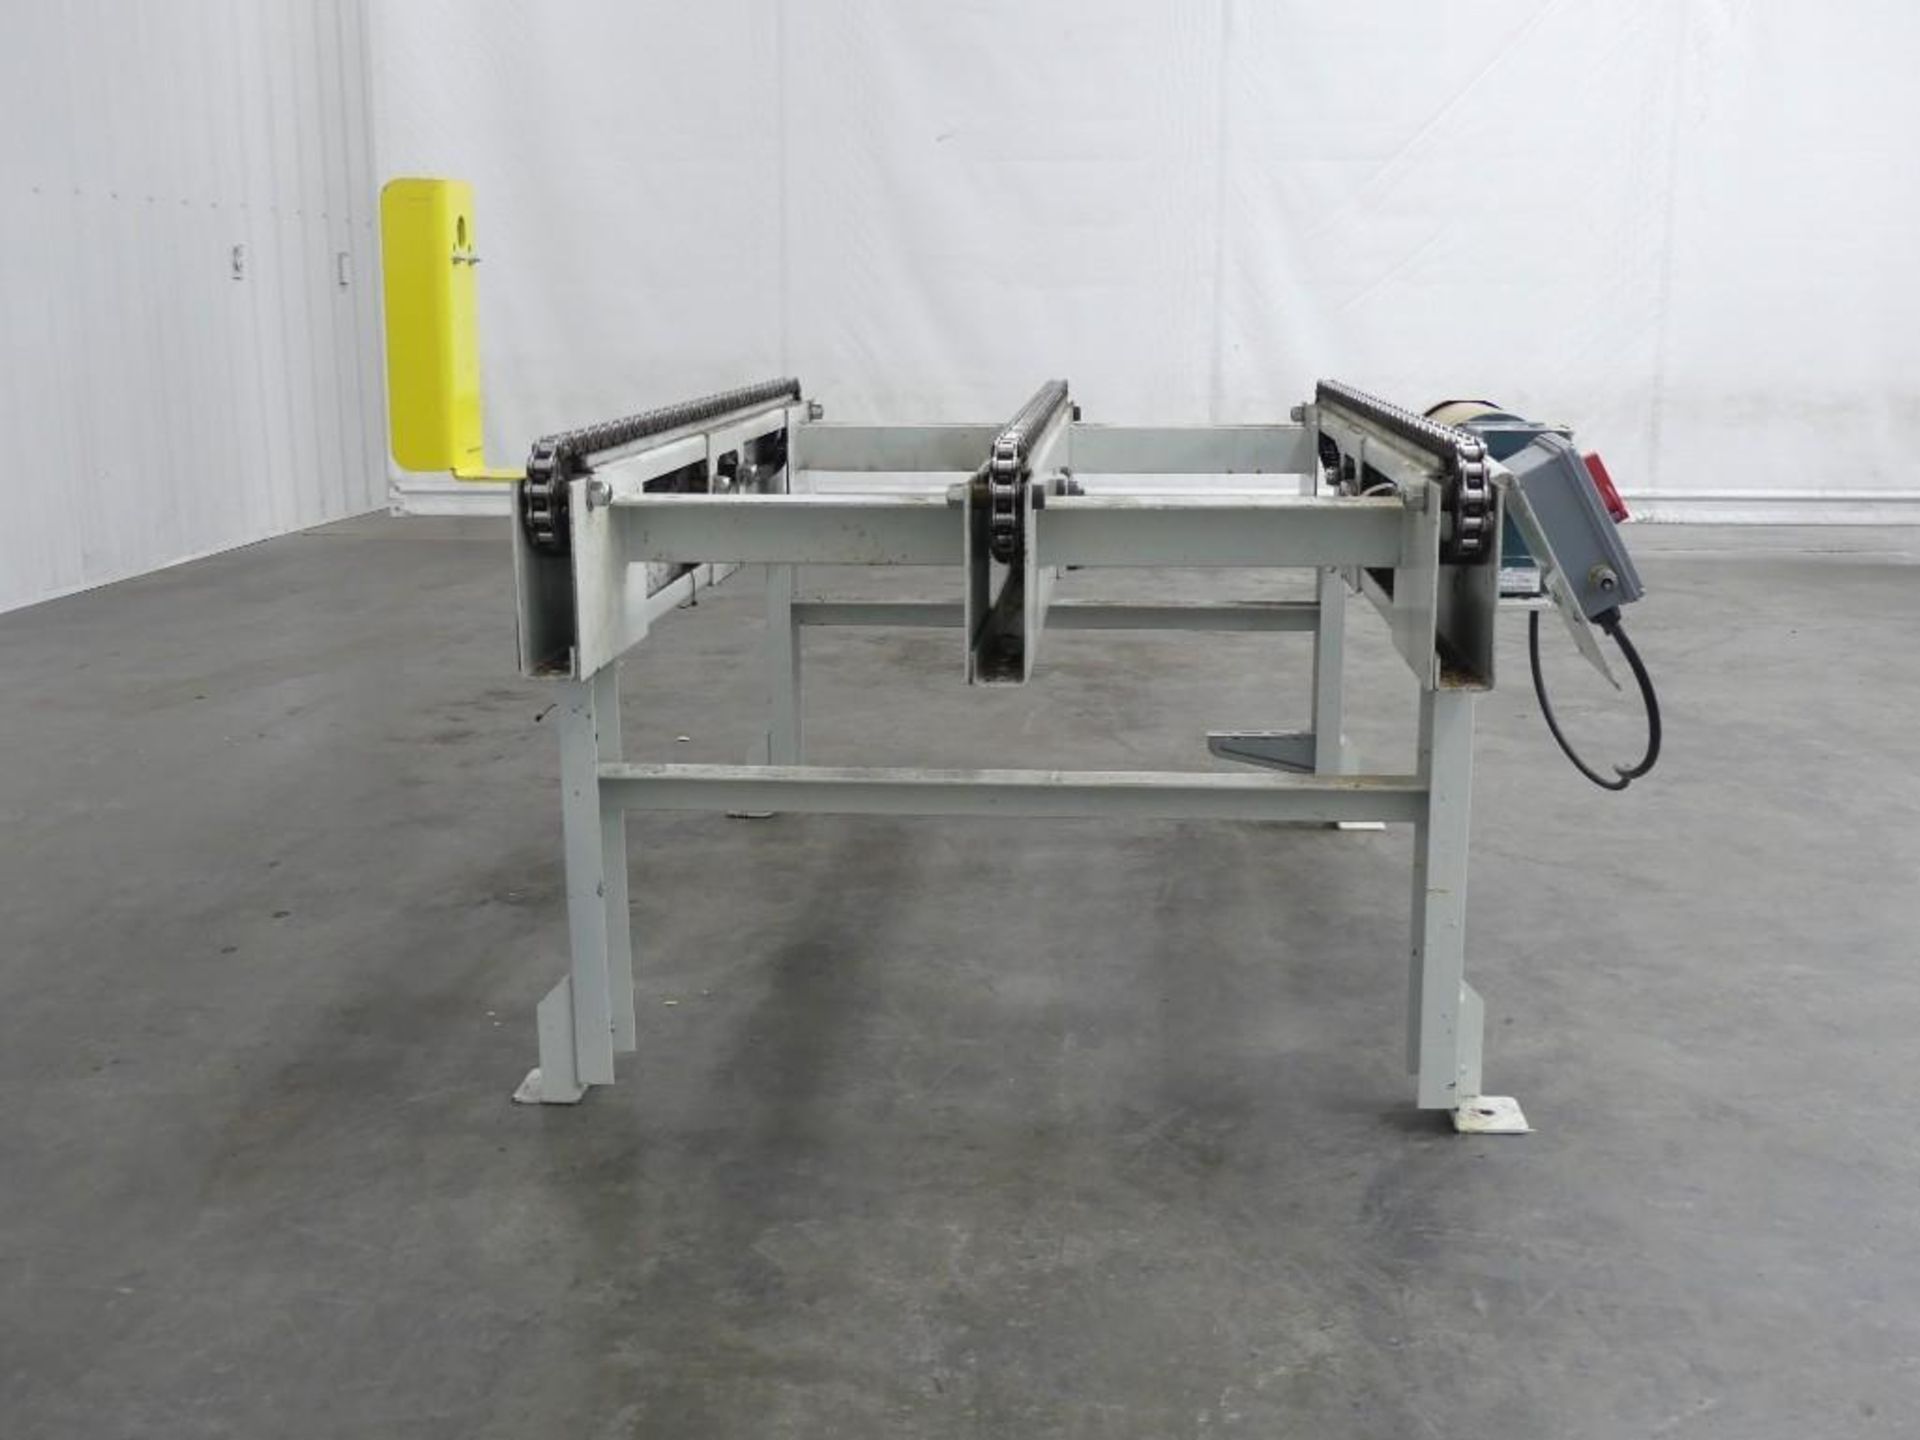 vonGAL 60 Inch L x 37 Inch W Chain Pallet Conveyor - Image 2 of 7